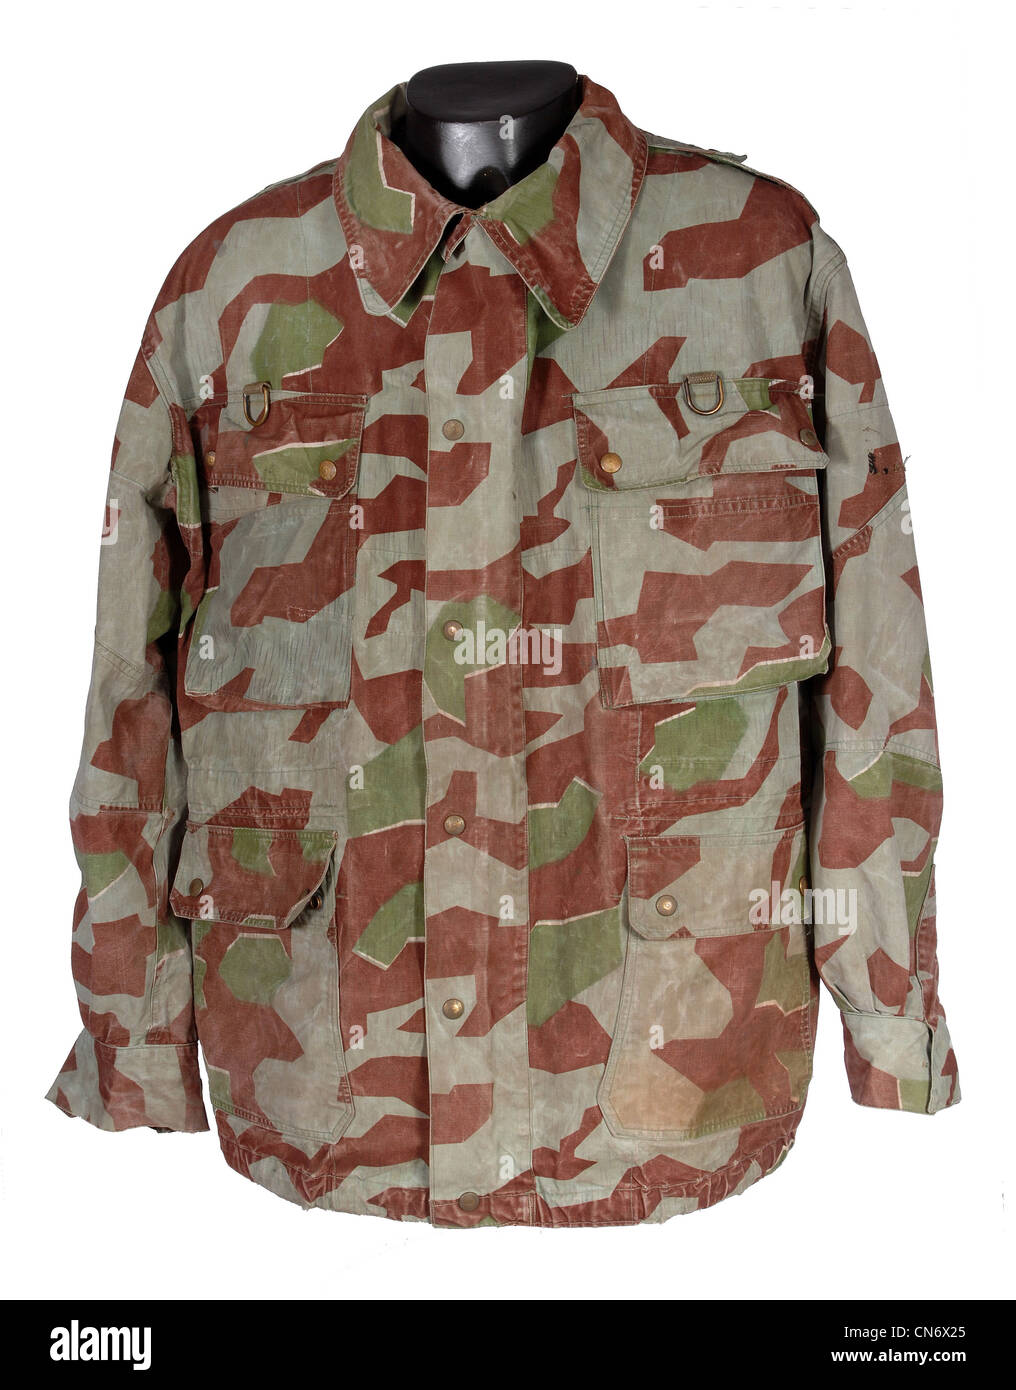 Camouflage clothing as used by military forces, German Bundeswehr camouflage 1950s Stock Photo